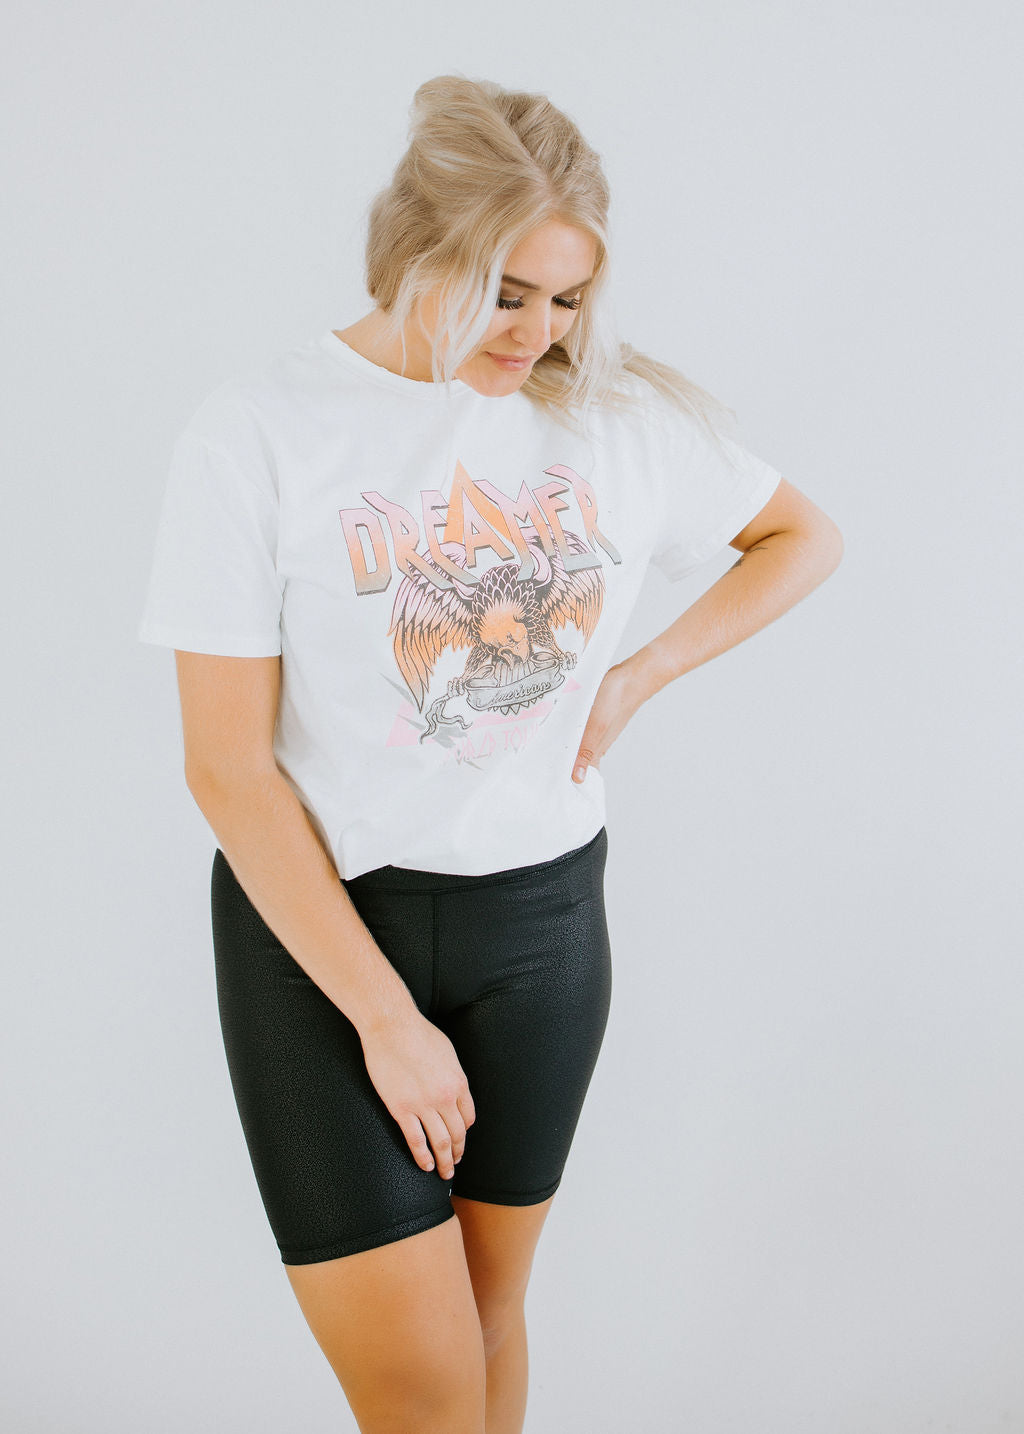 Dreamer Oversized Graphic Tee FINAL SALE